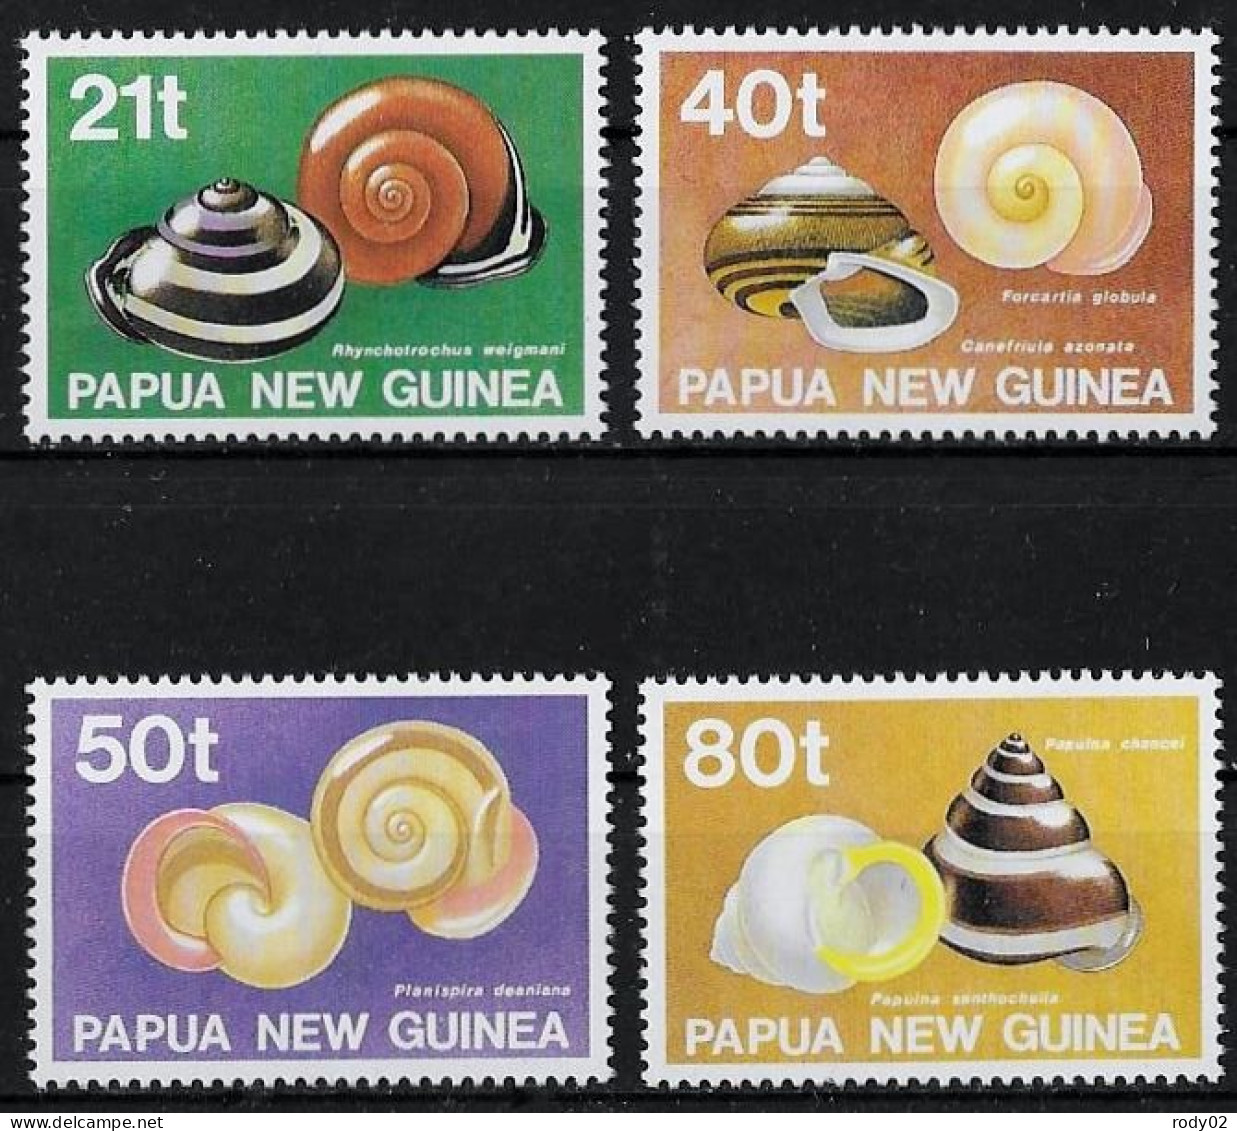 PAPOUASIE NOUVELLE-GUINEE - COQUILLAGES - N° 626 A 629 - NEUF** MNH - Muscheln